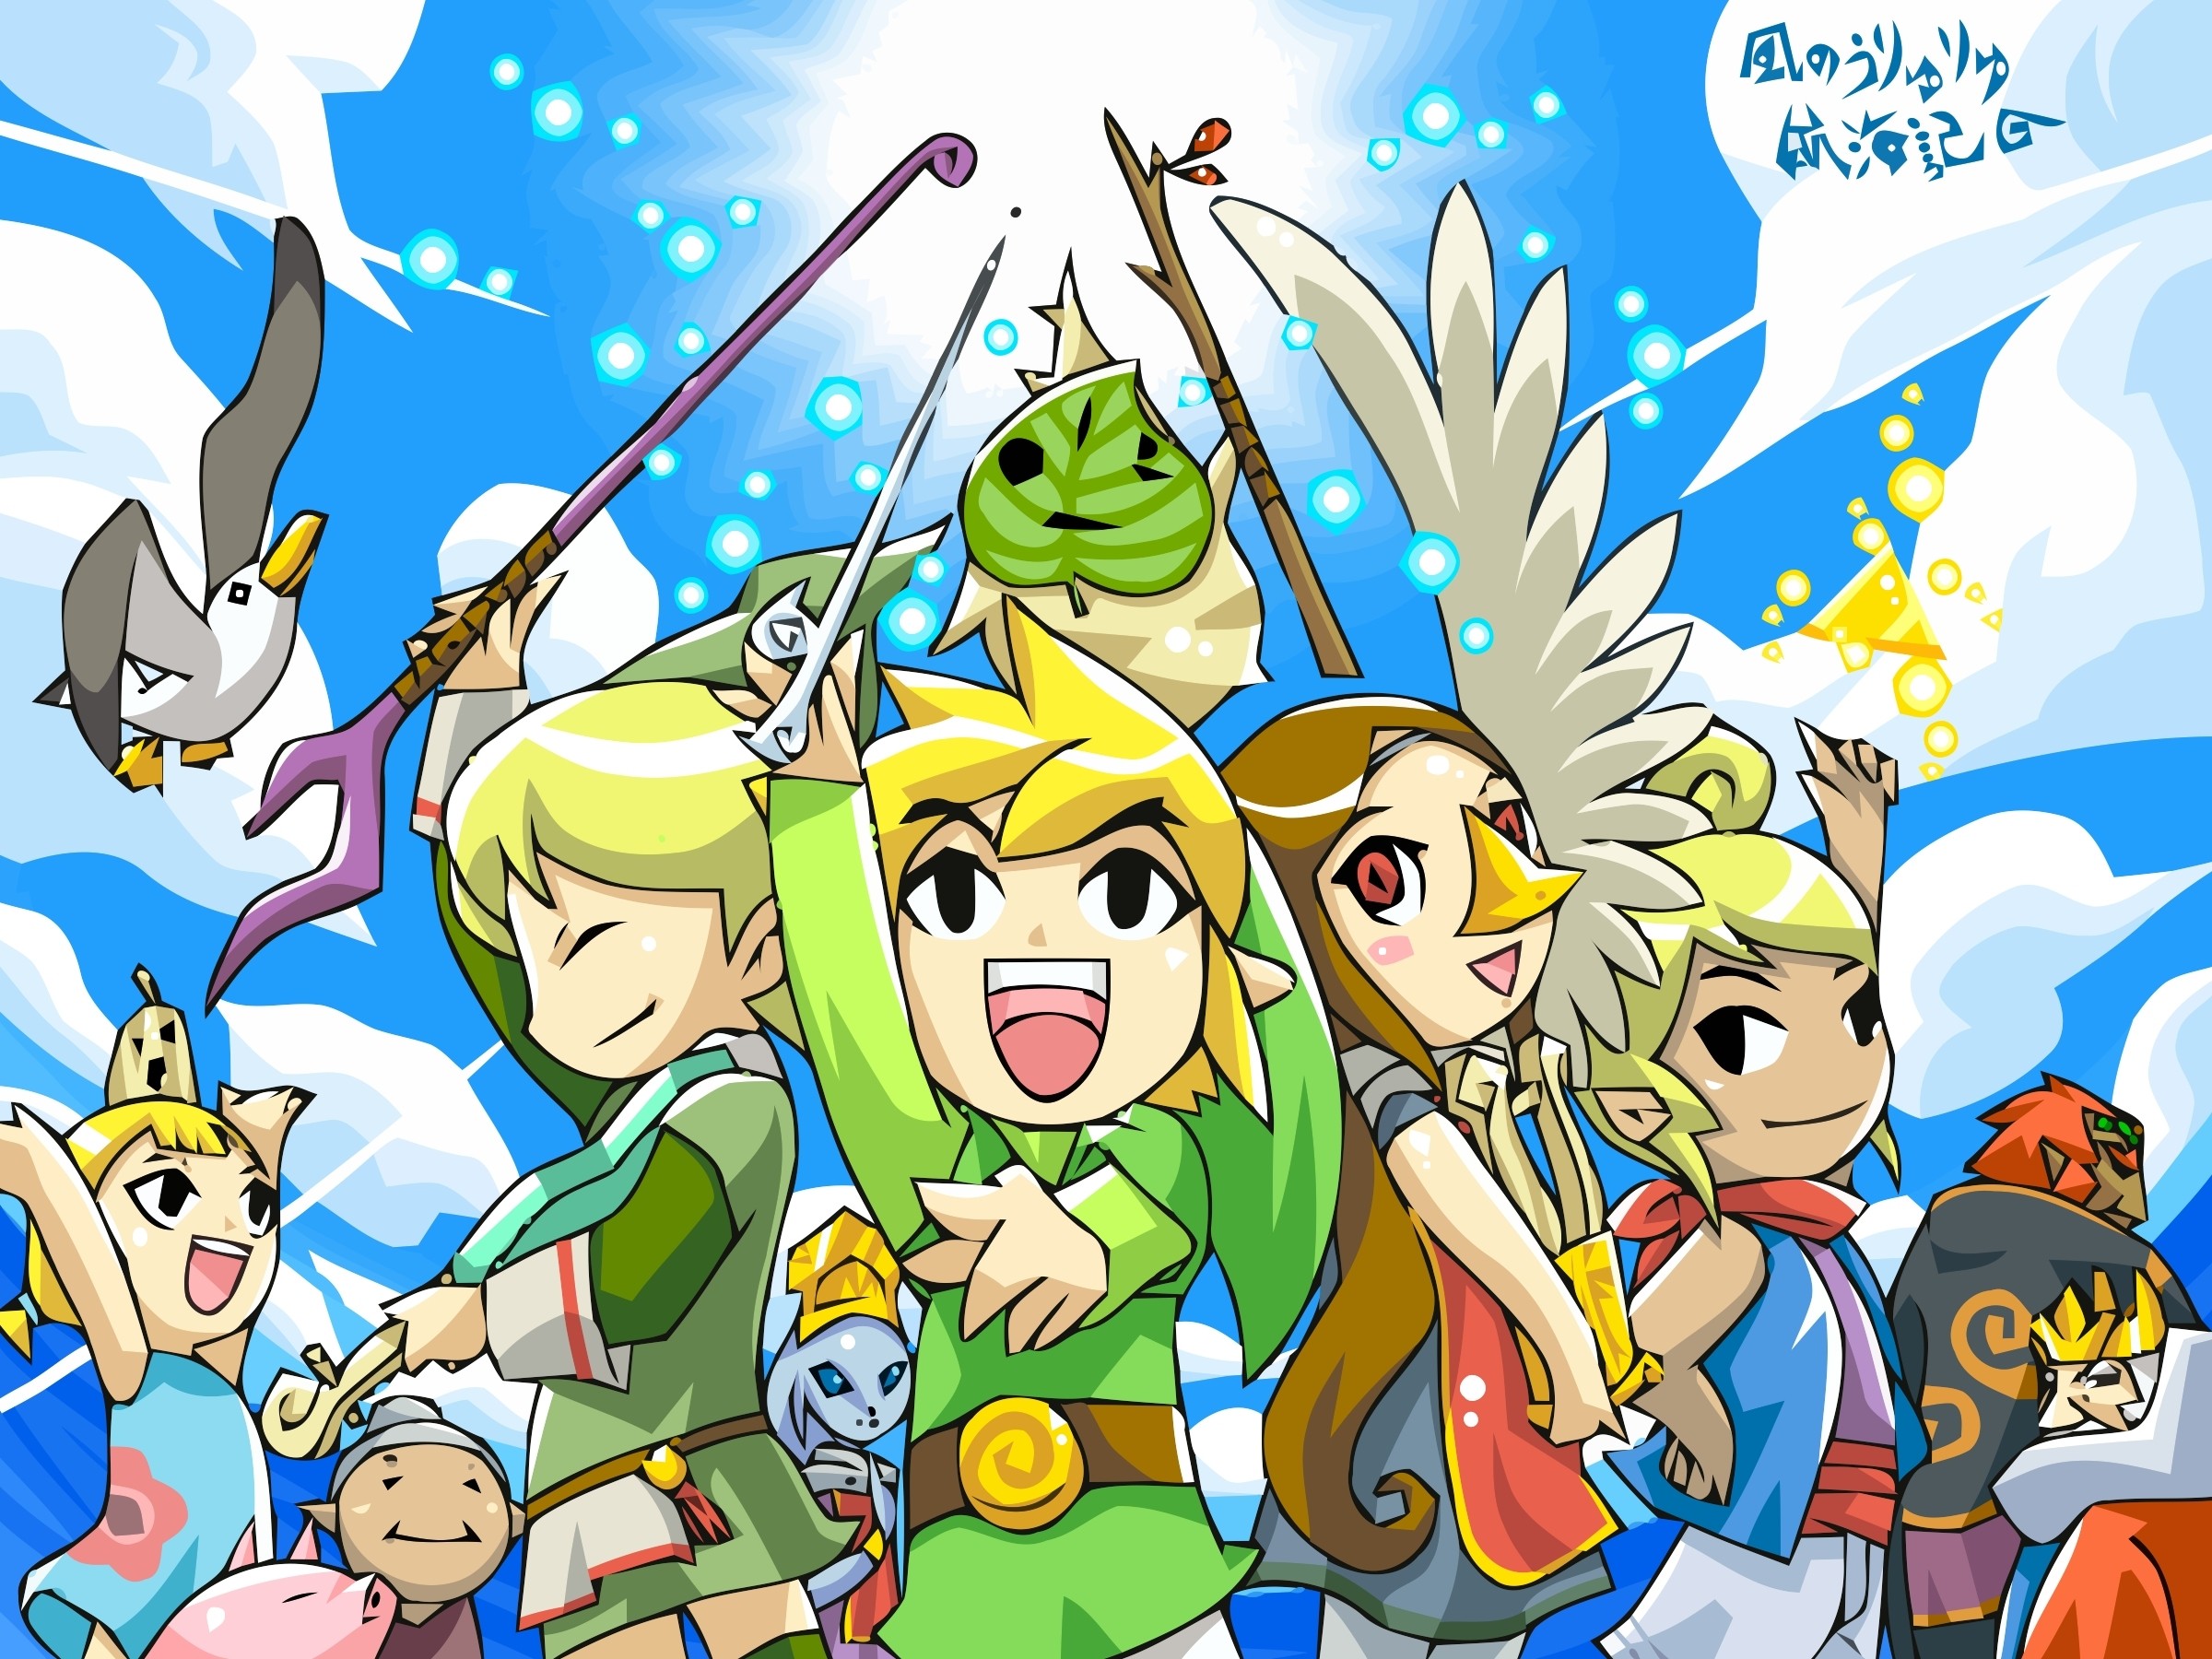 2400x1800 Wind Waker images Wind Waker Wallpaper HD wallpaper and background photos